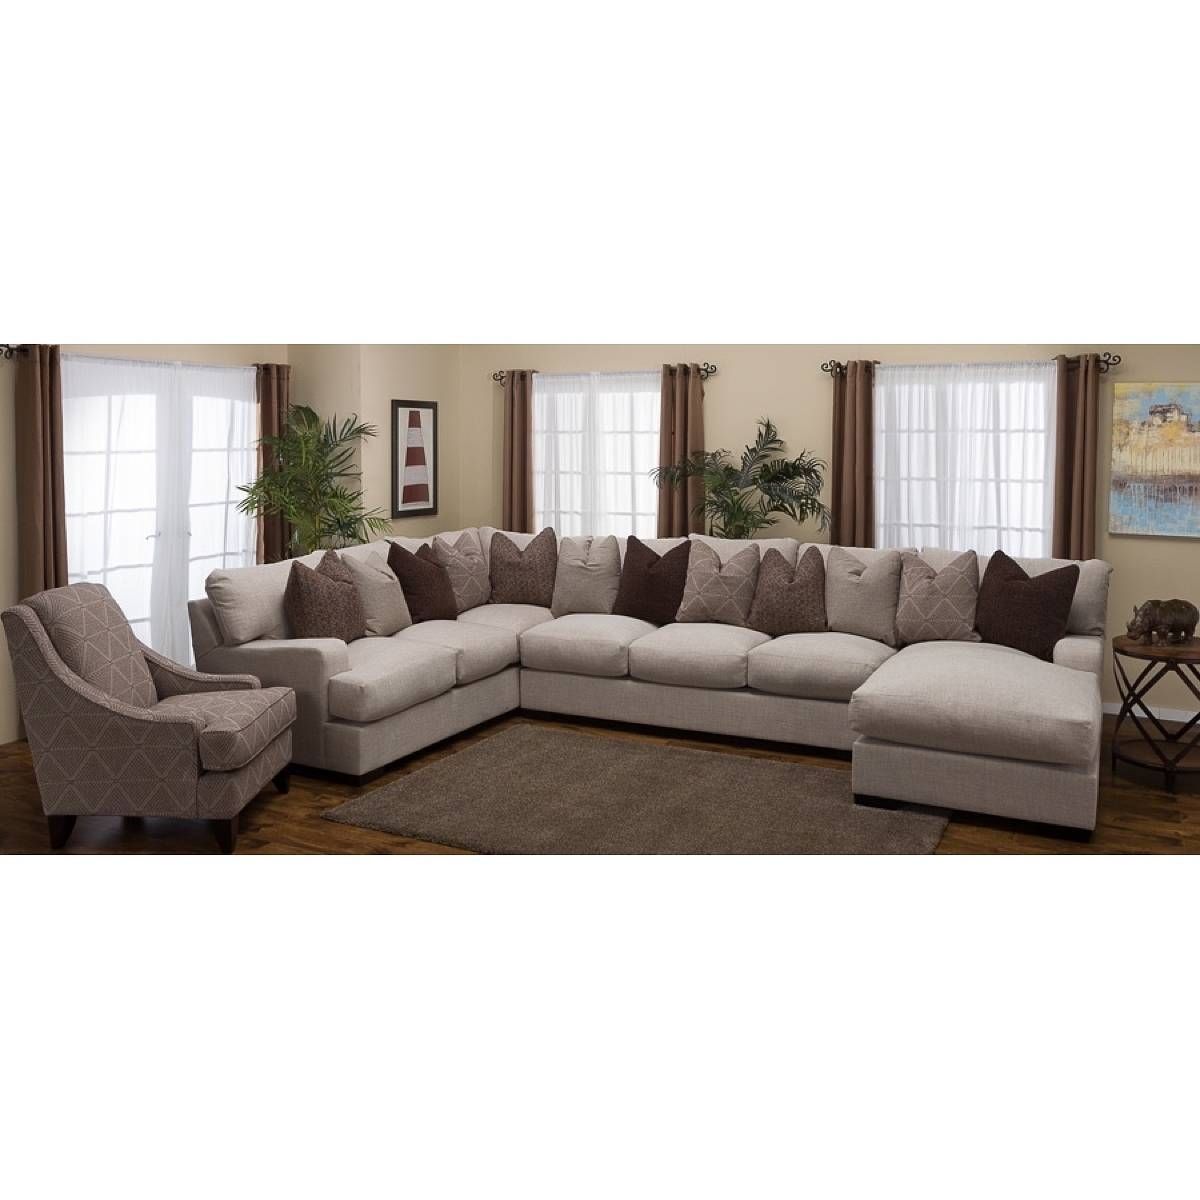 12 Collection Of Eco Friendly Sectional Sofa Intended For Eco Friendly Sectional Sofa (View 7 of 30)